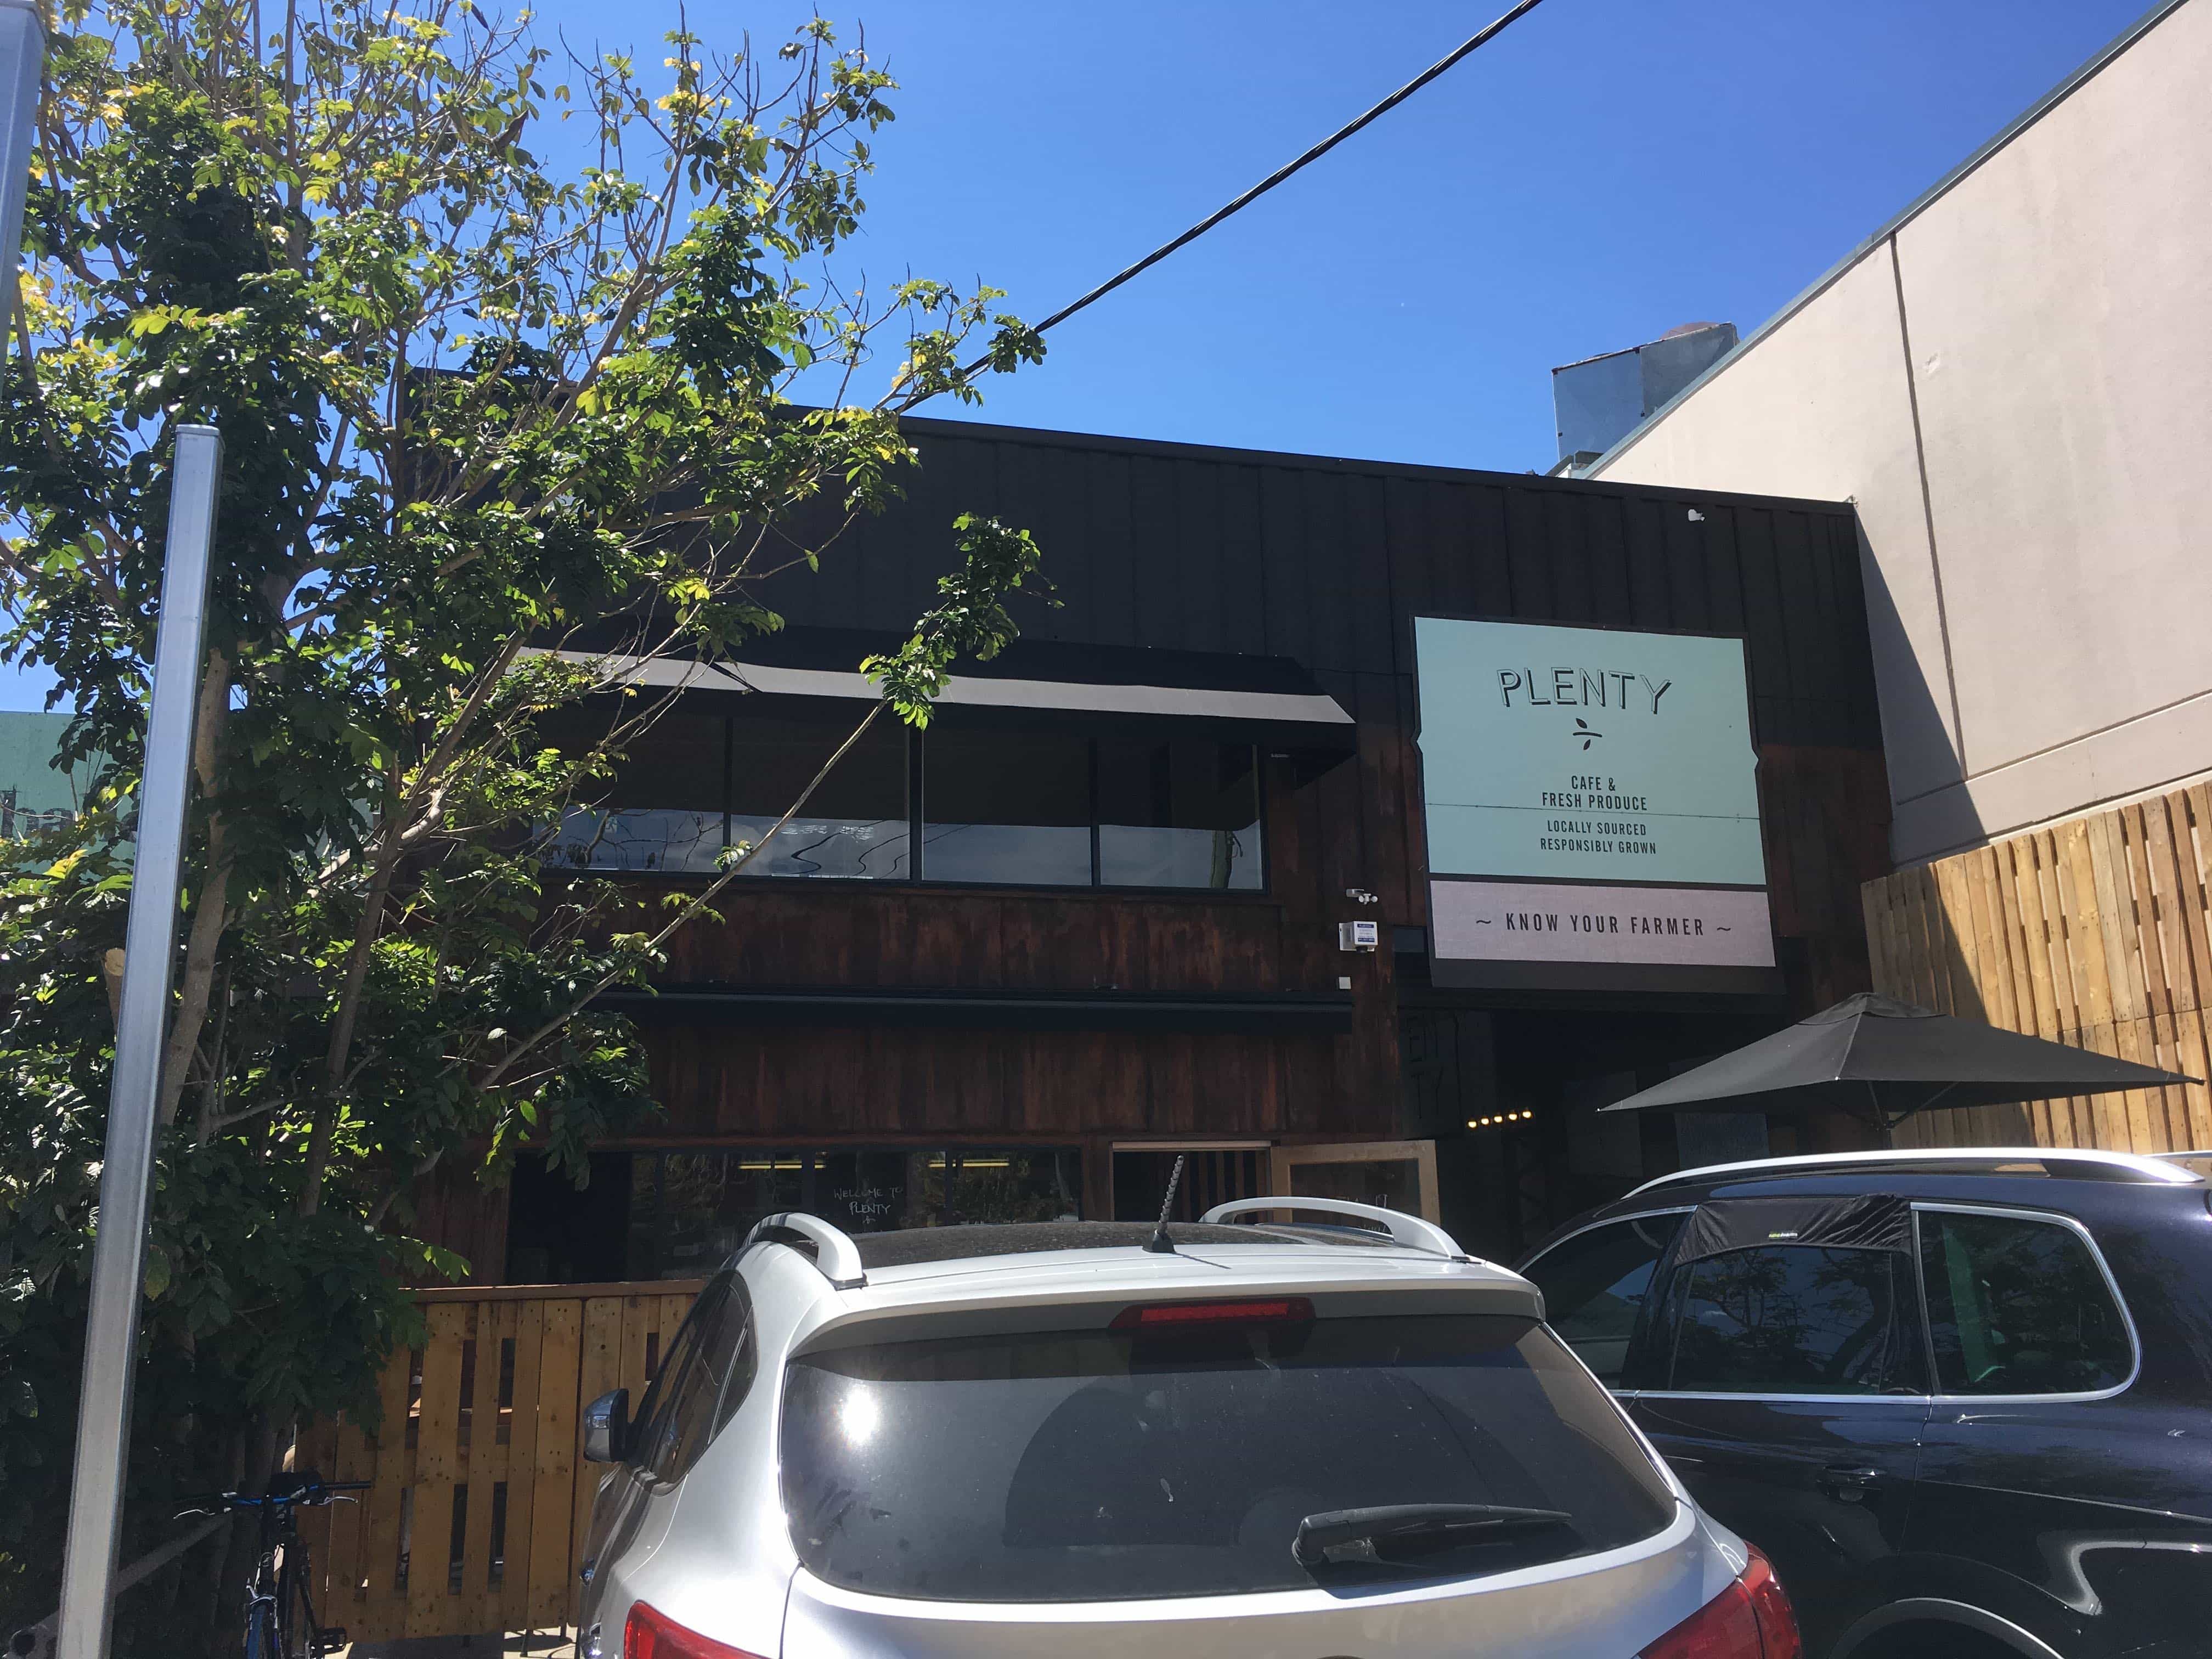 Plenty is a cafe on nearby Montague Road. Photo taken by Property Mash 27/10/2016.